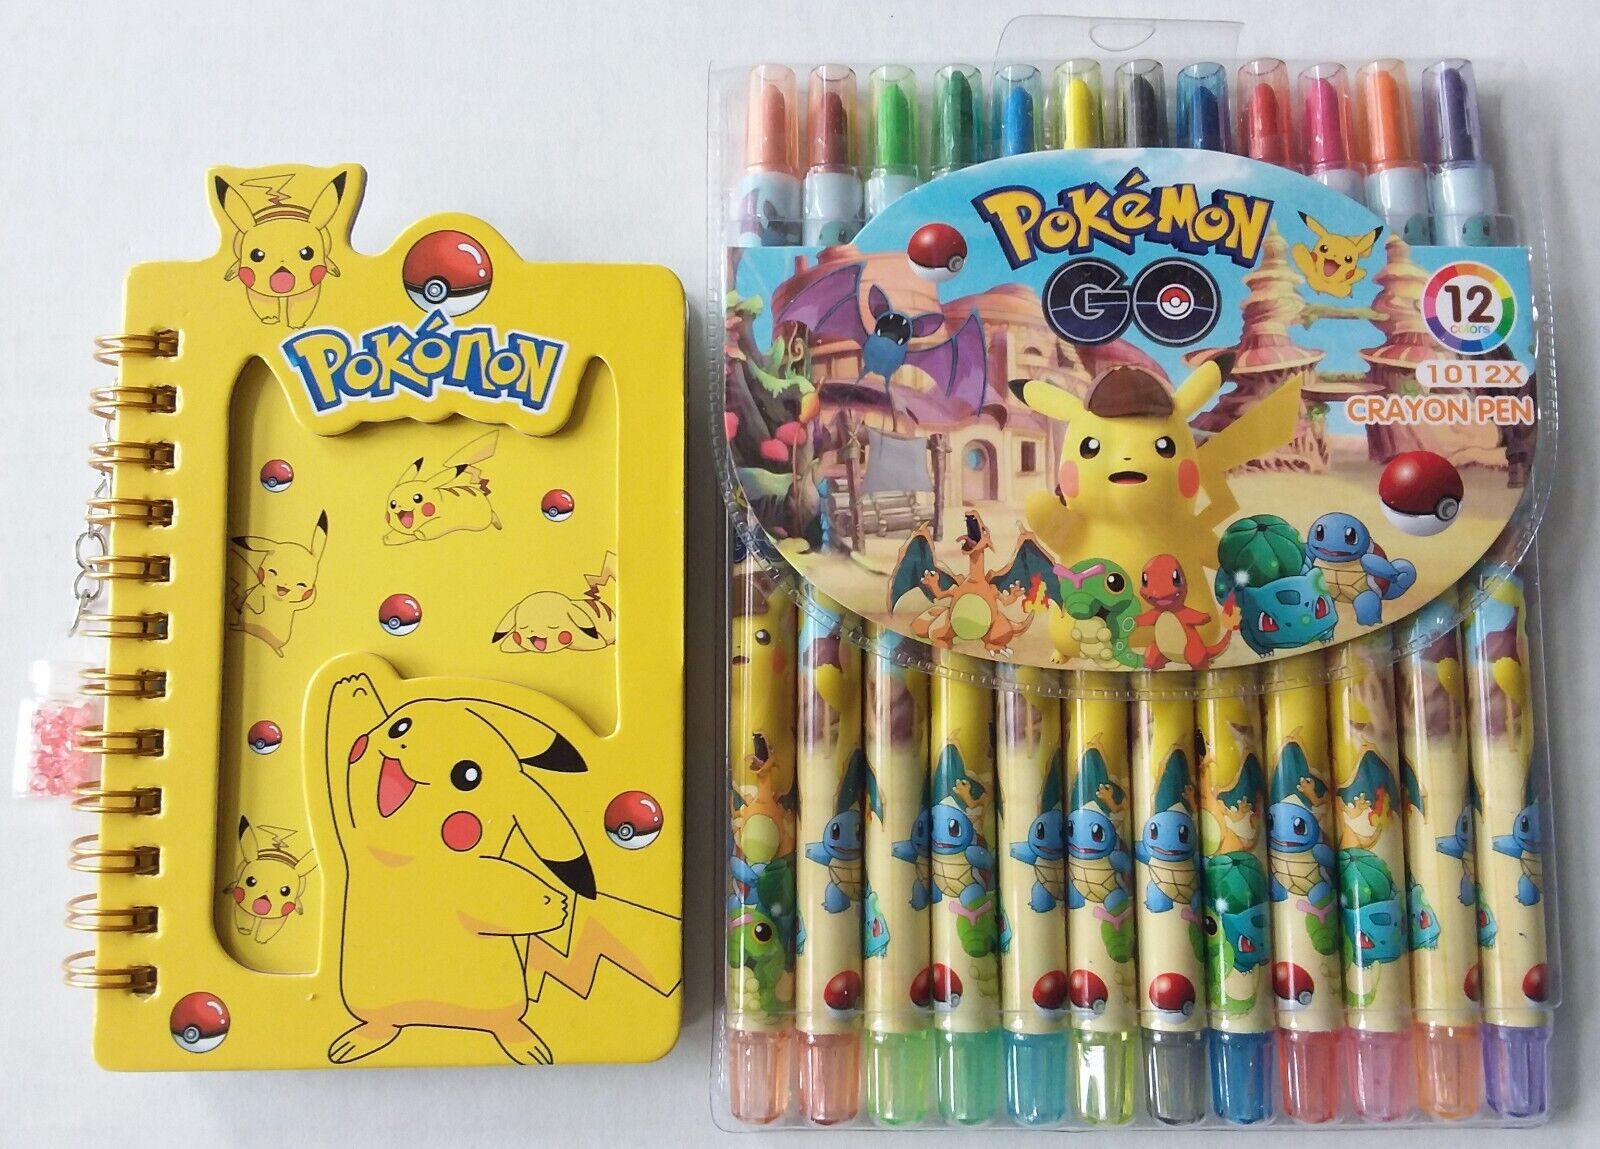 Pokemon twist-up crayons set of 12 plus mini Pikachu notebook with pop-up page